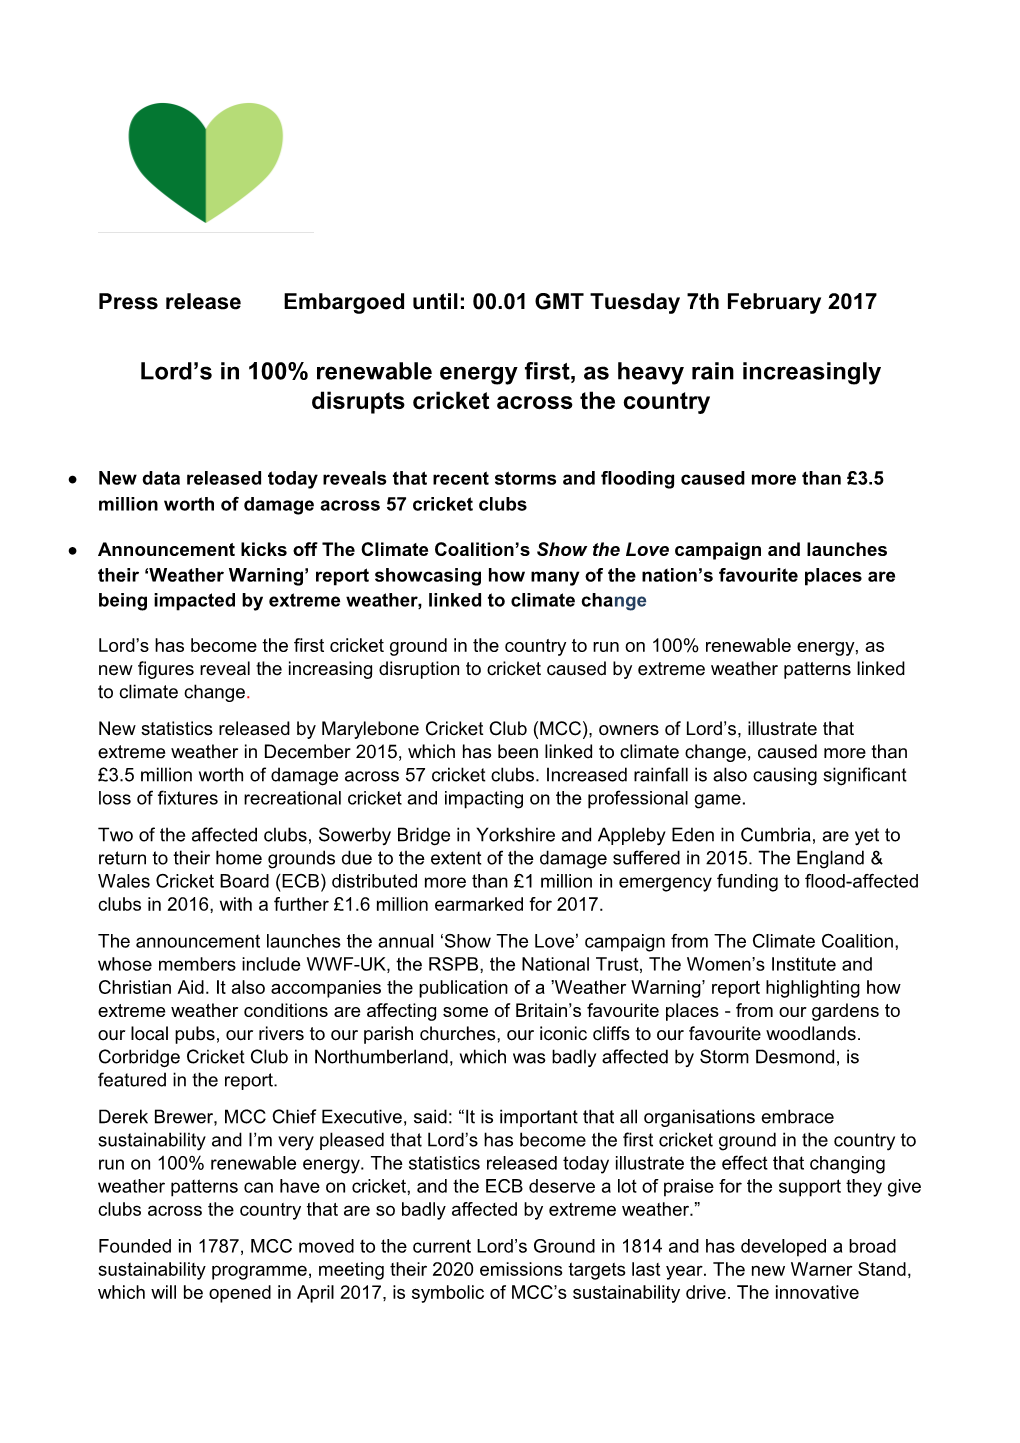 Press Release Embargoed Until: 00.01 GMT Tuesday 7Th February 2017